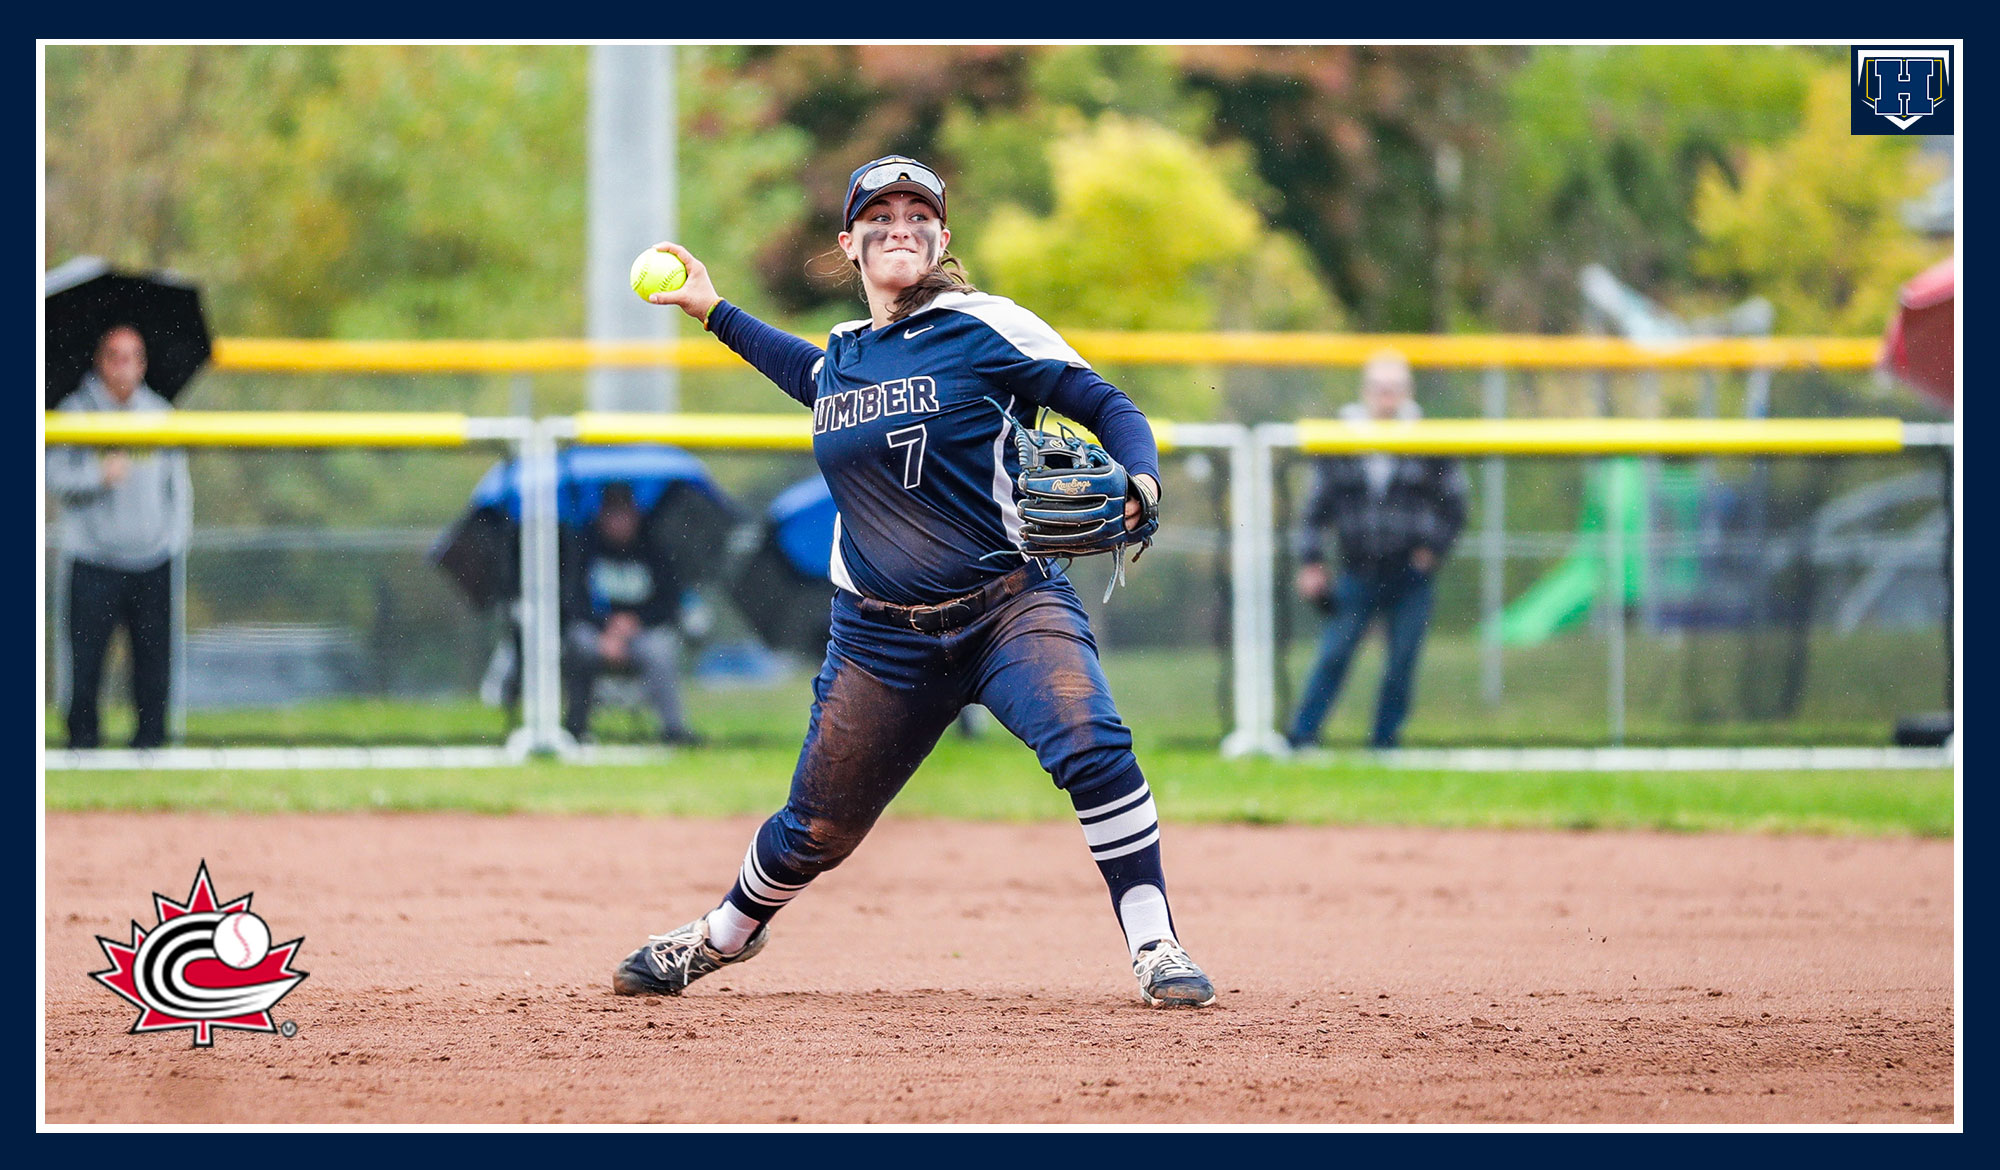 Reese Velocci throwing a ball in game for Humber softball